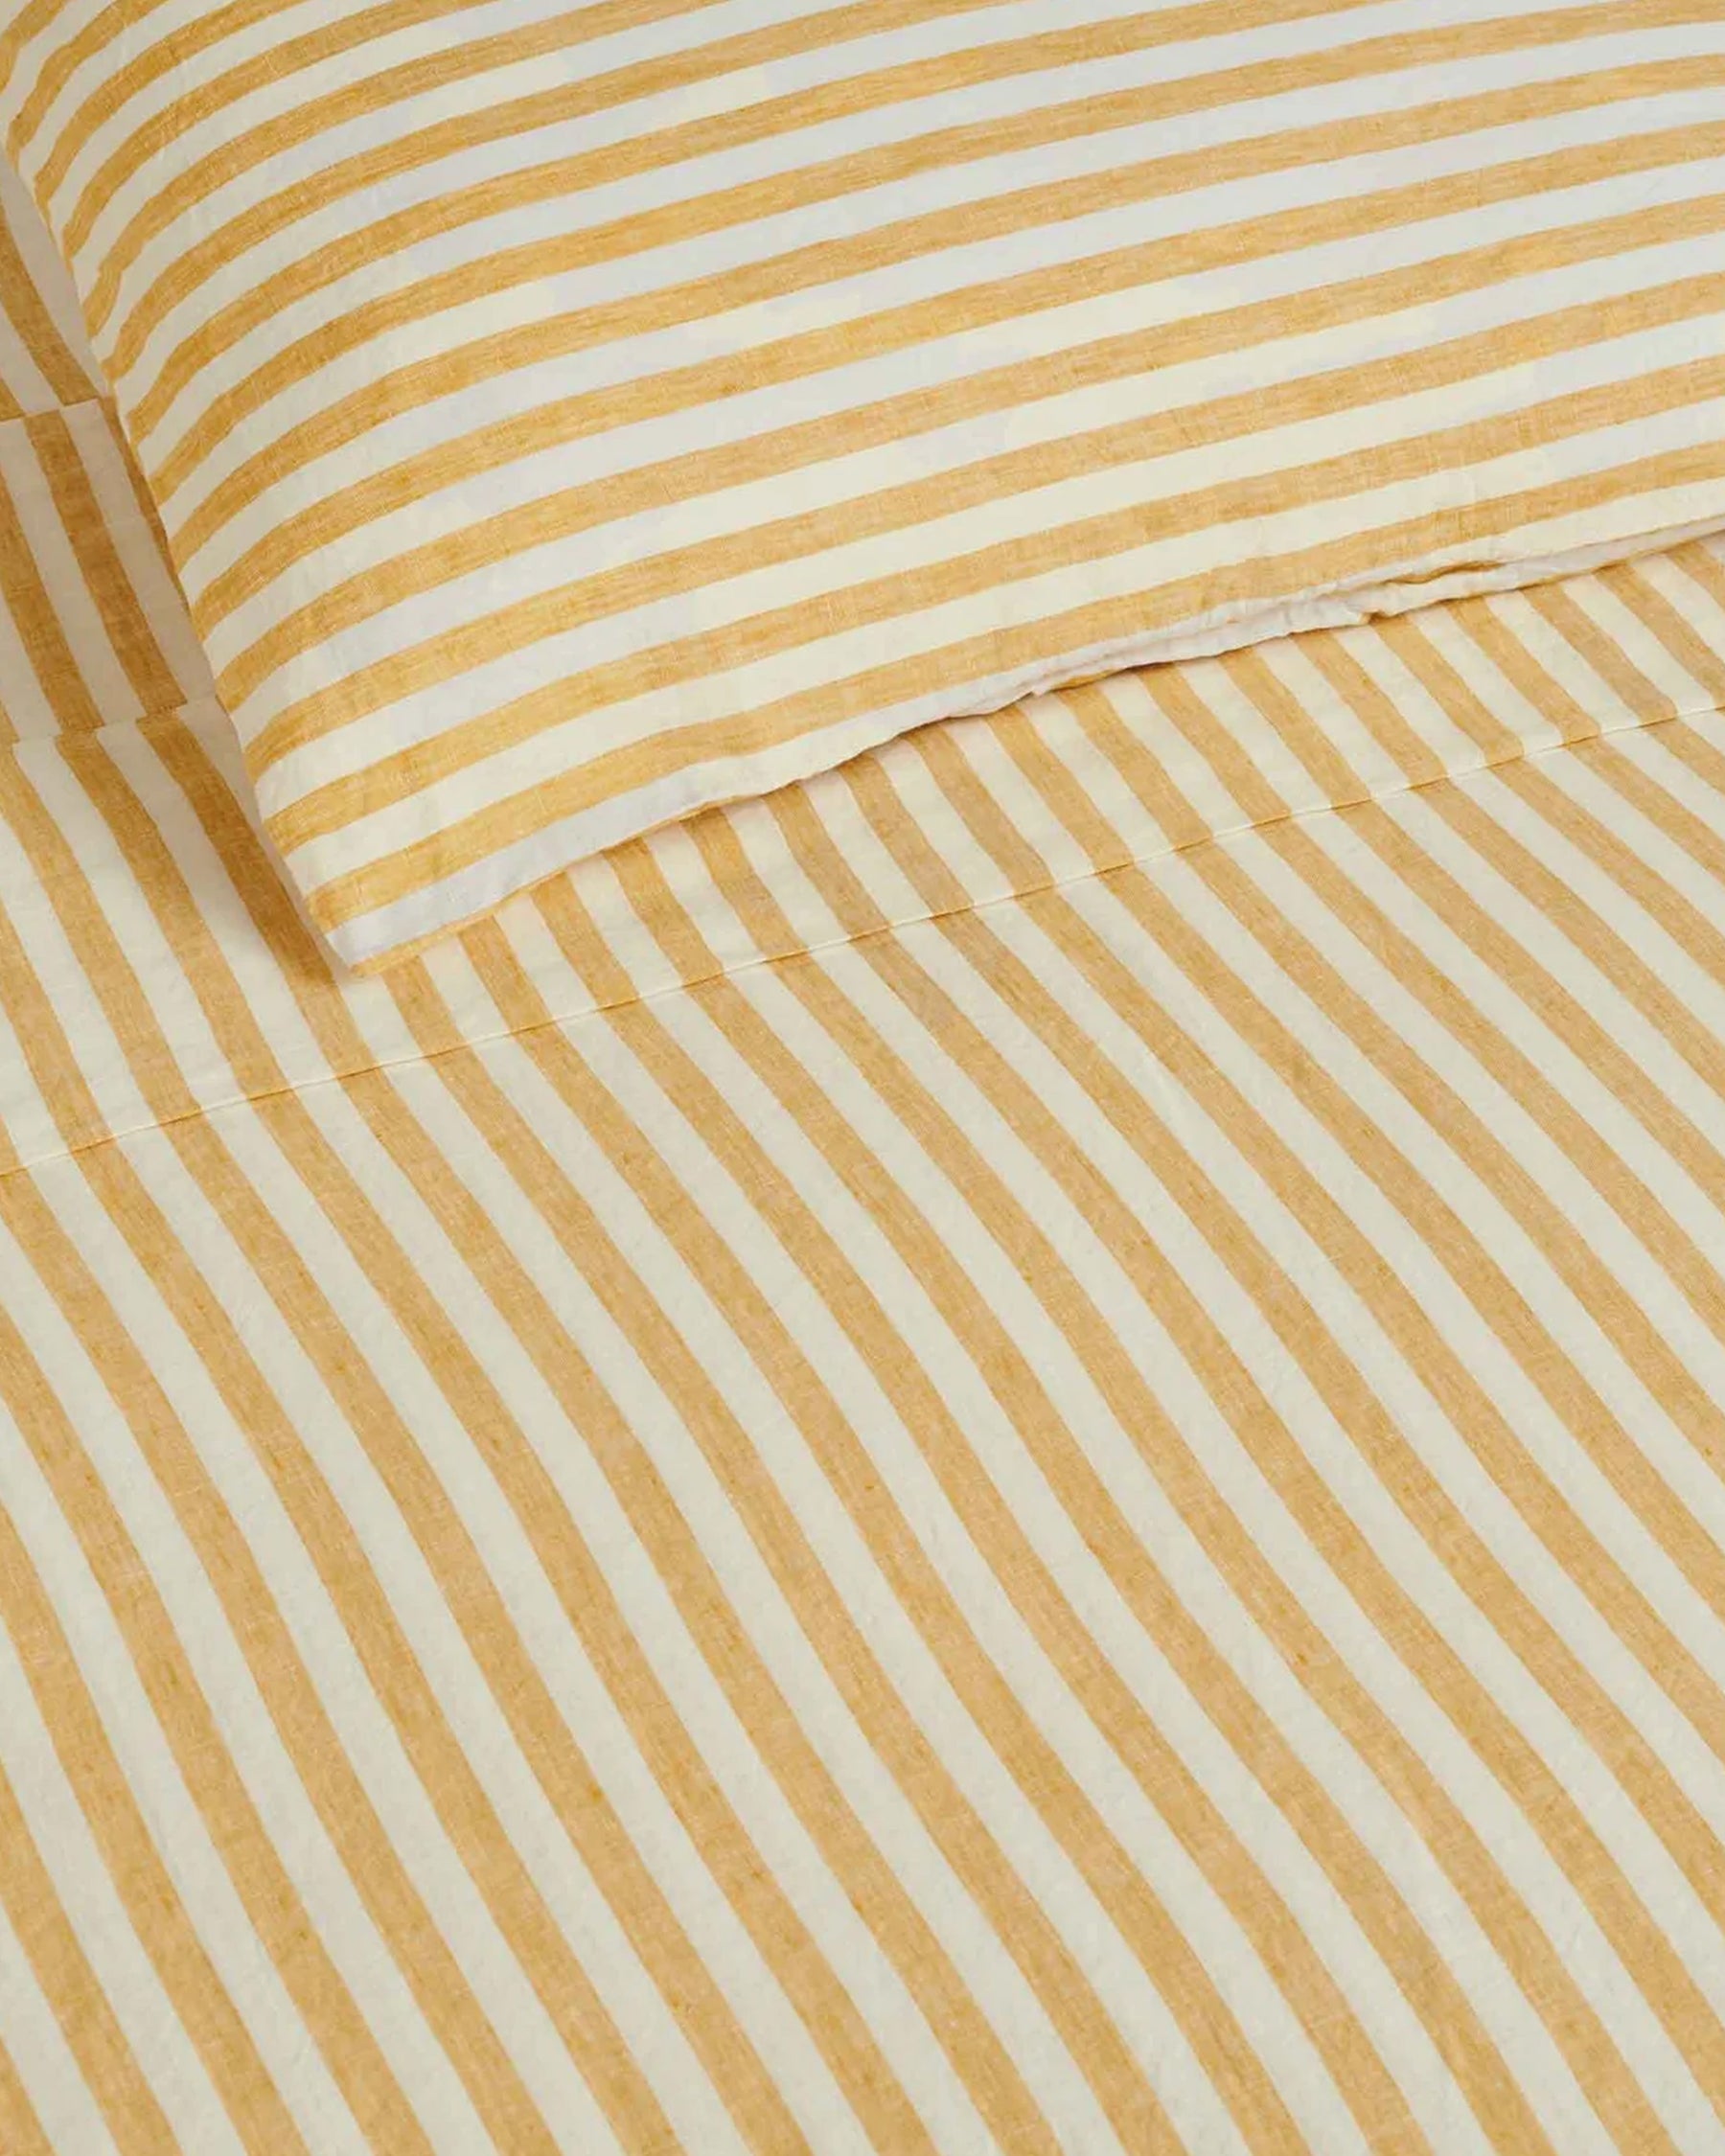 Make your bed your comfiest place with our 100% French linen flat sheet in Wide Natural Stripes. Designed to coordinate with Yellow Stripe Fitted Sheet and Pillowcase to create a sheet set.